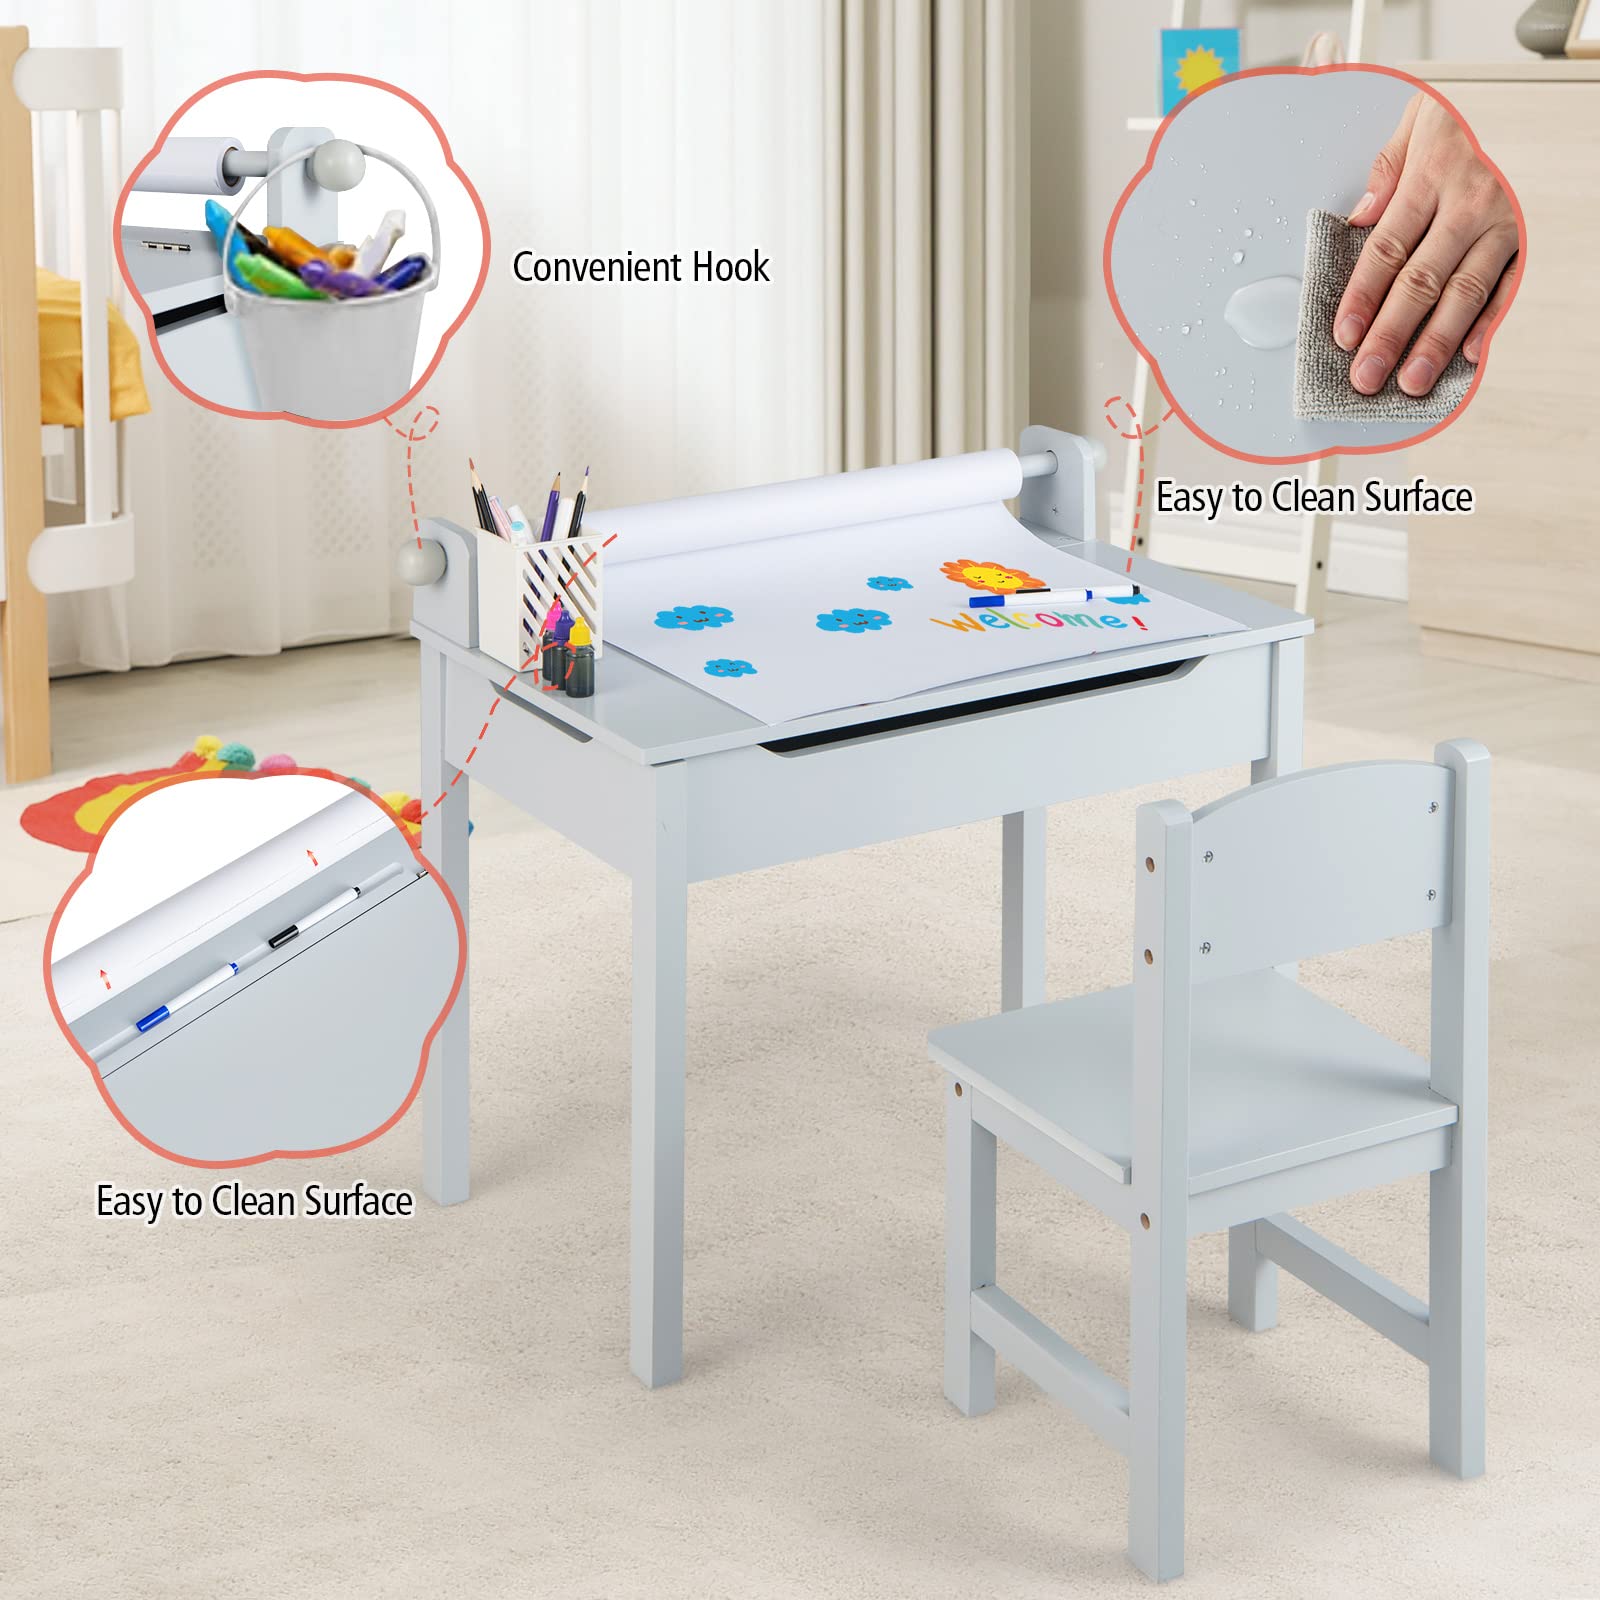 INFANS Kids Table and Chair Set with Paper Roll, Wooden Lift-top Desk